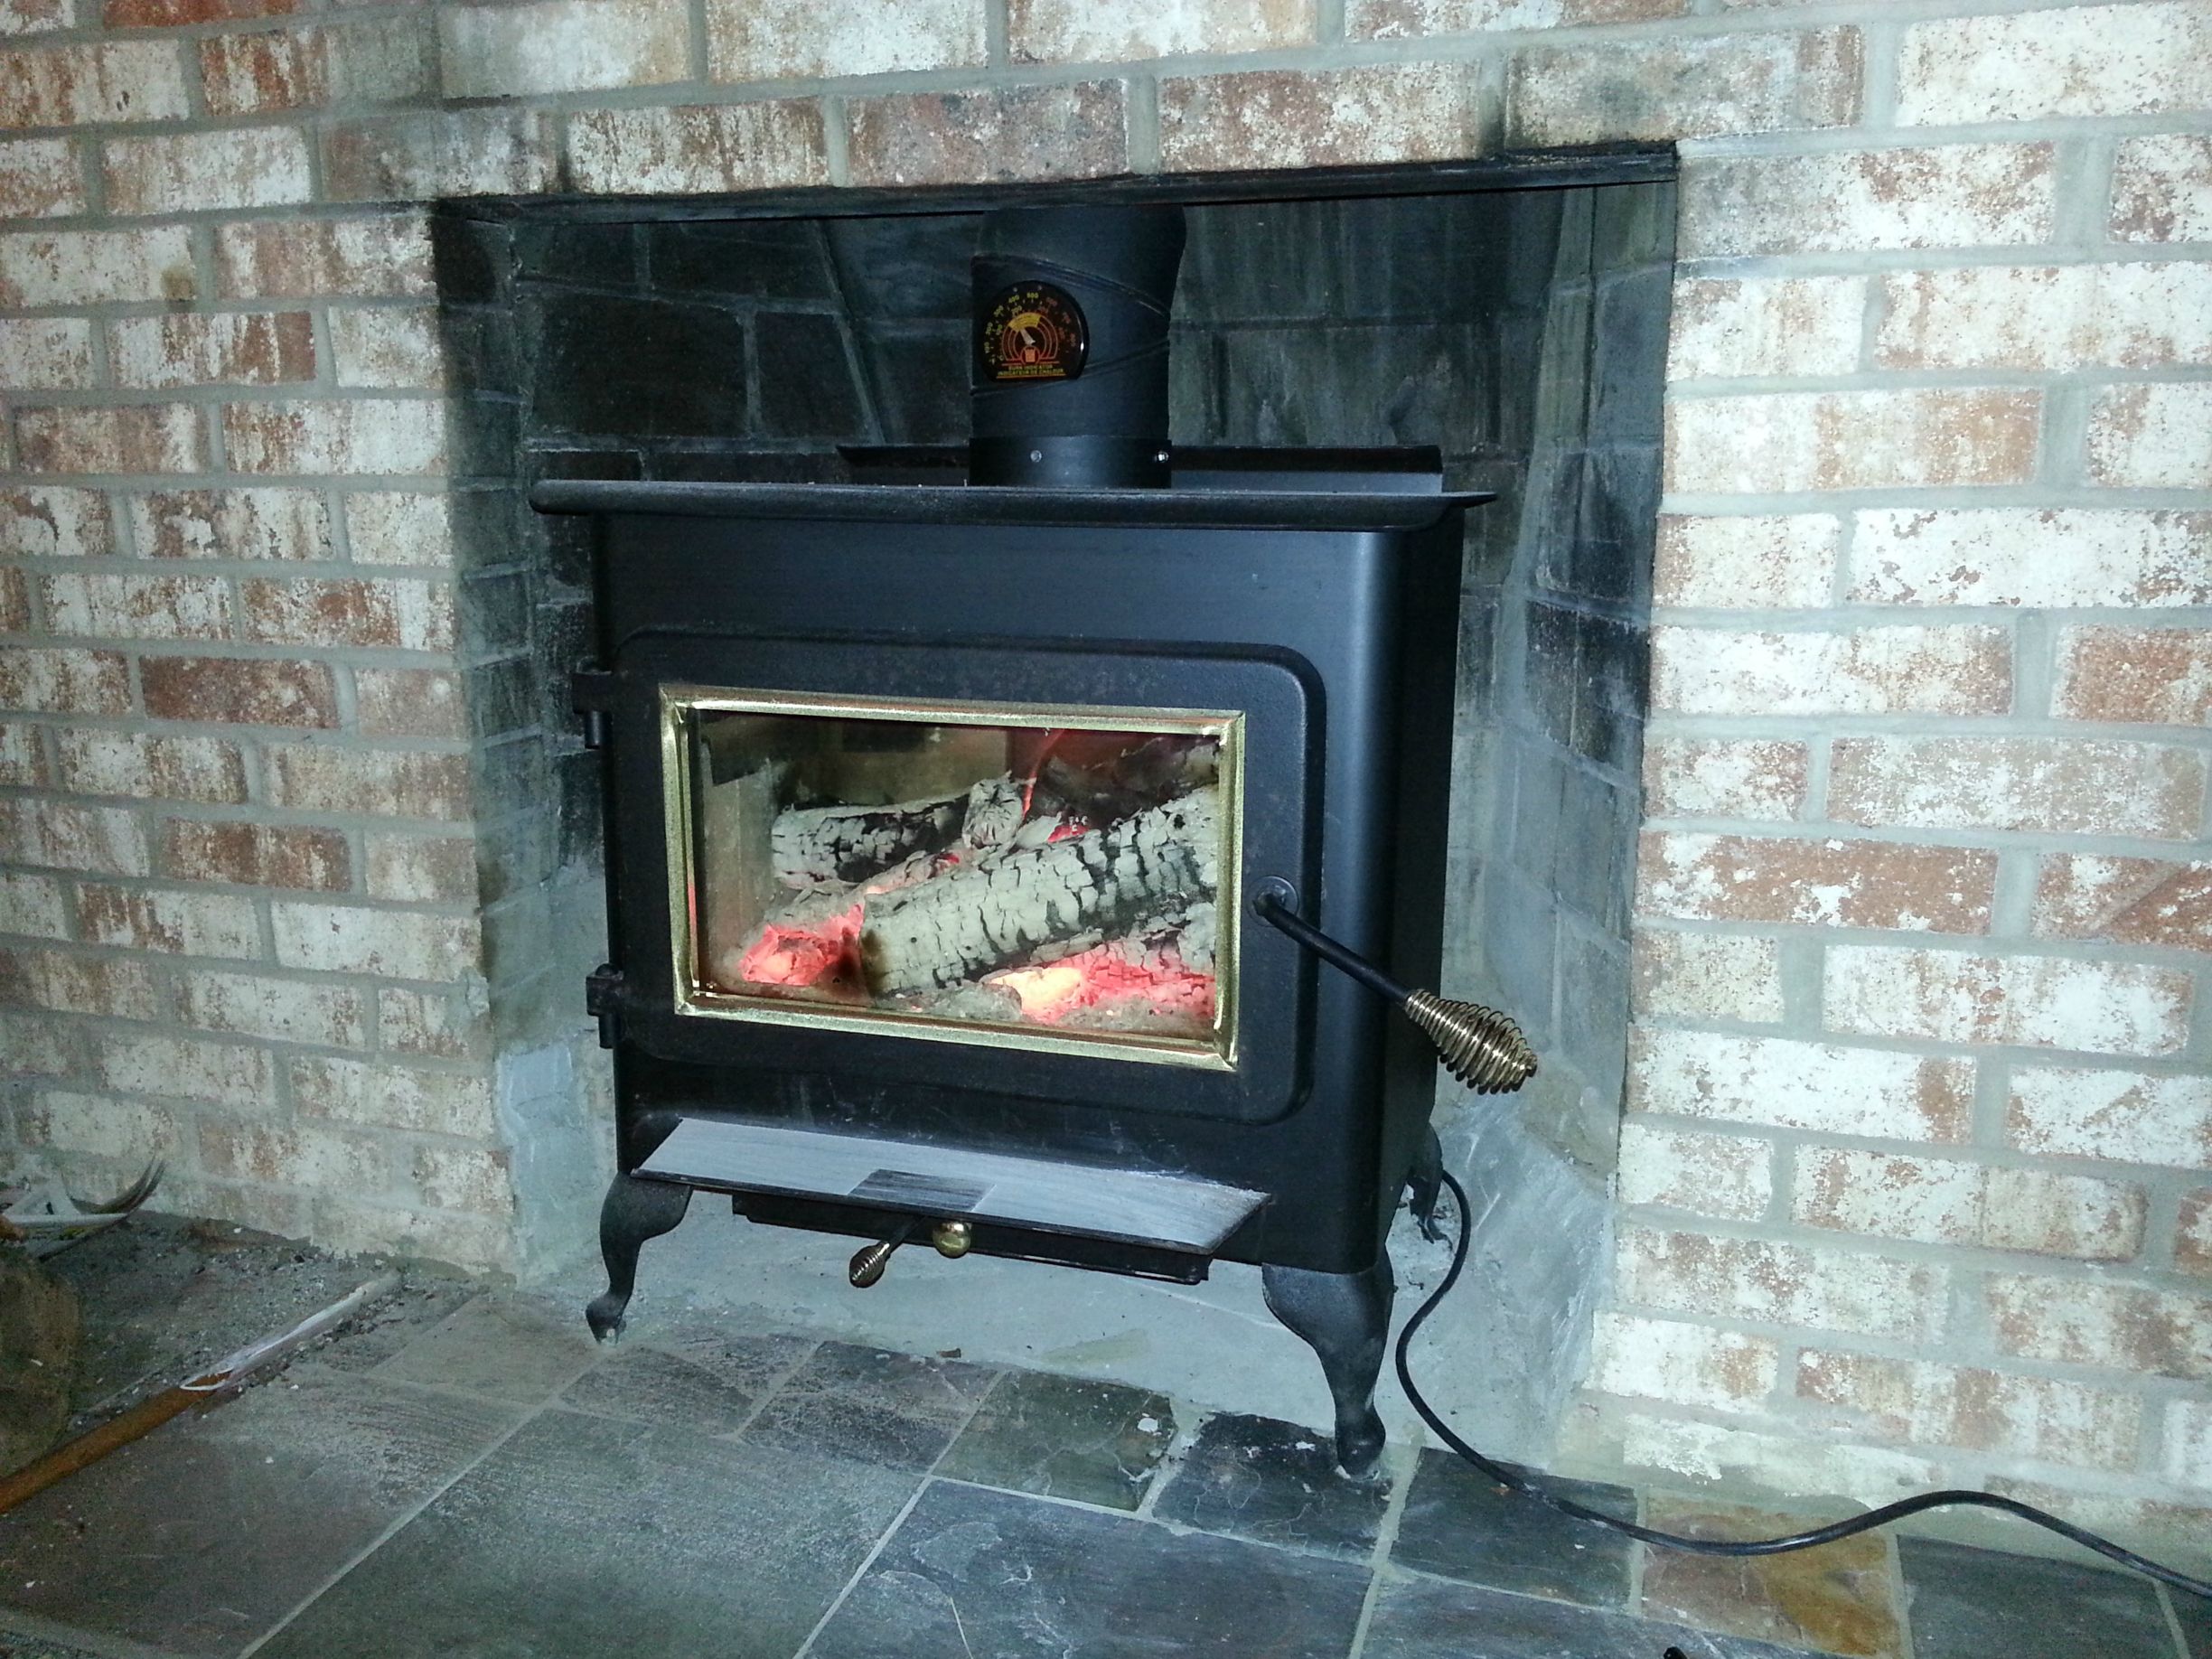 Can I make this stove fit in my fireplace?